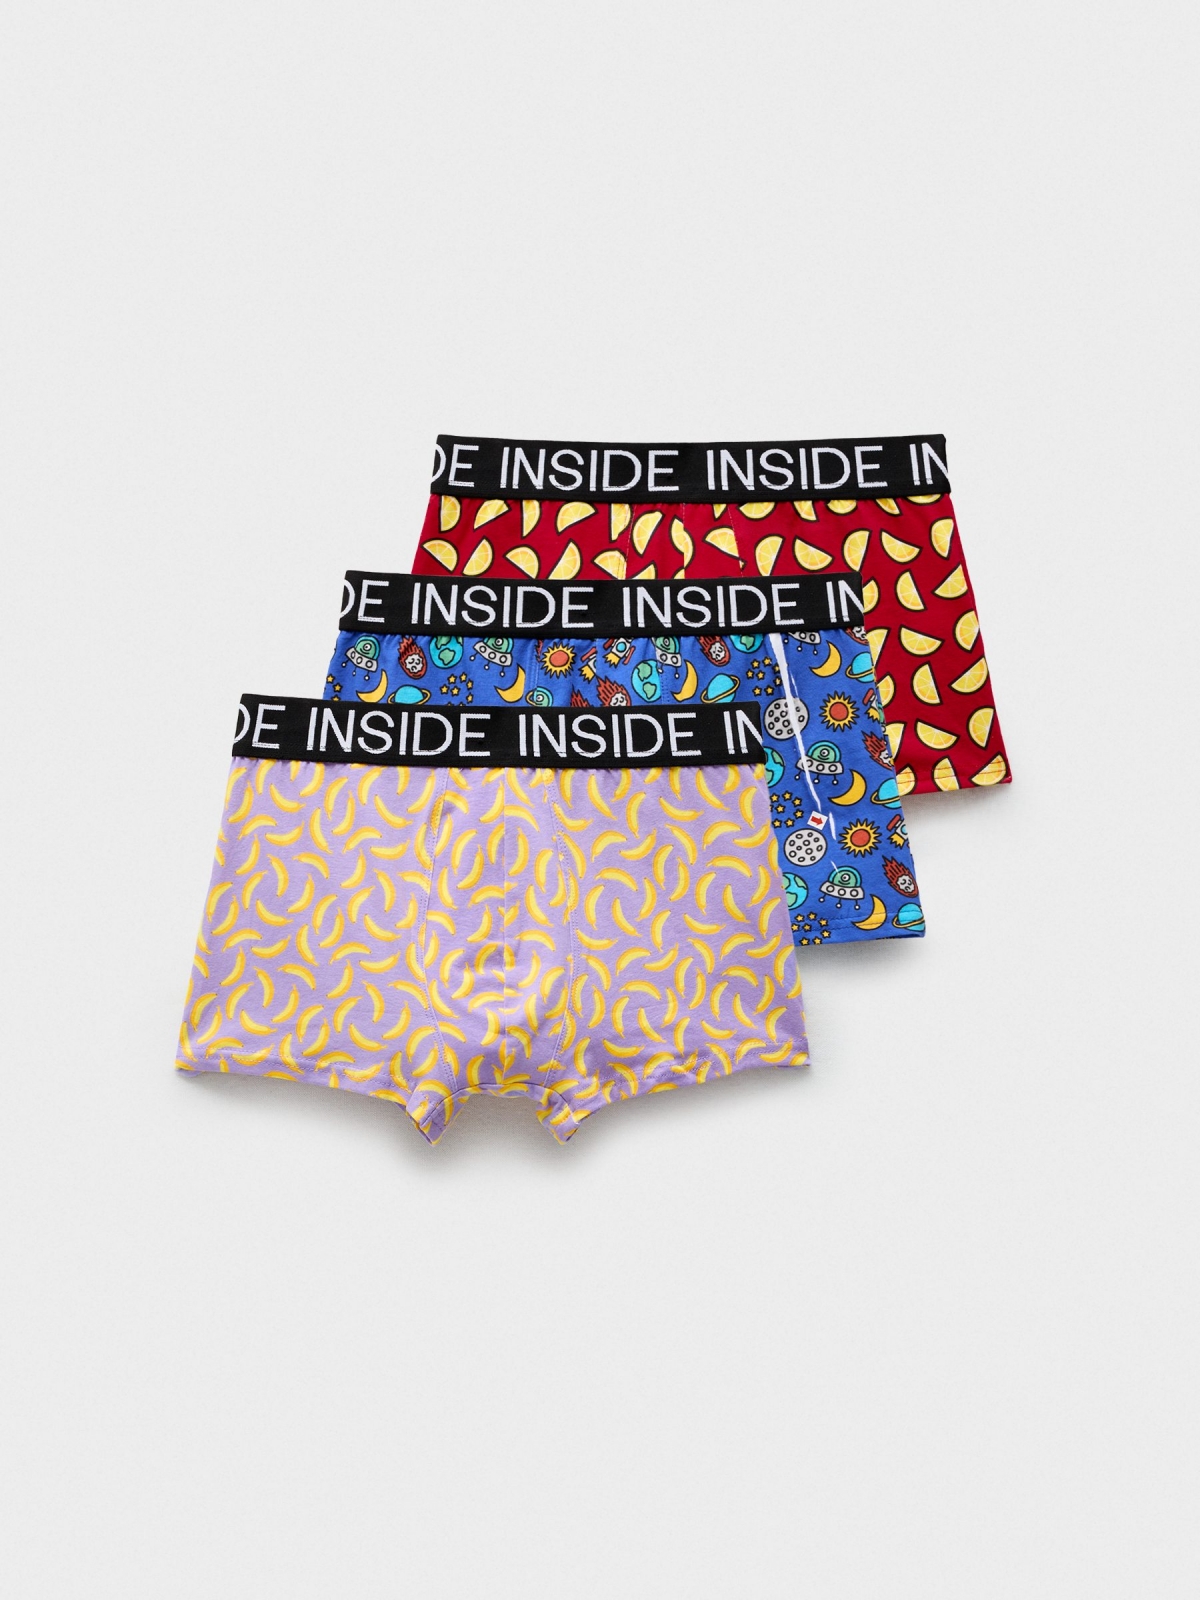 Calzoncillo print pack 3 Ropa Interior | INSIDE